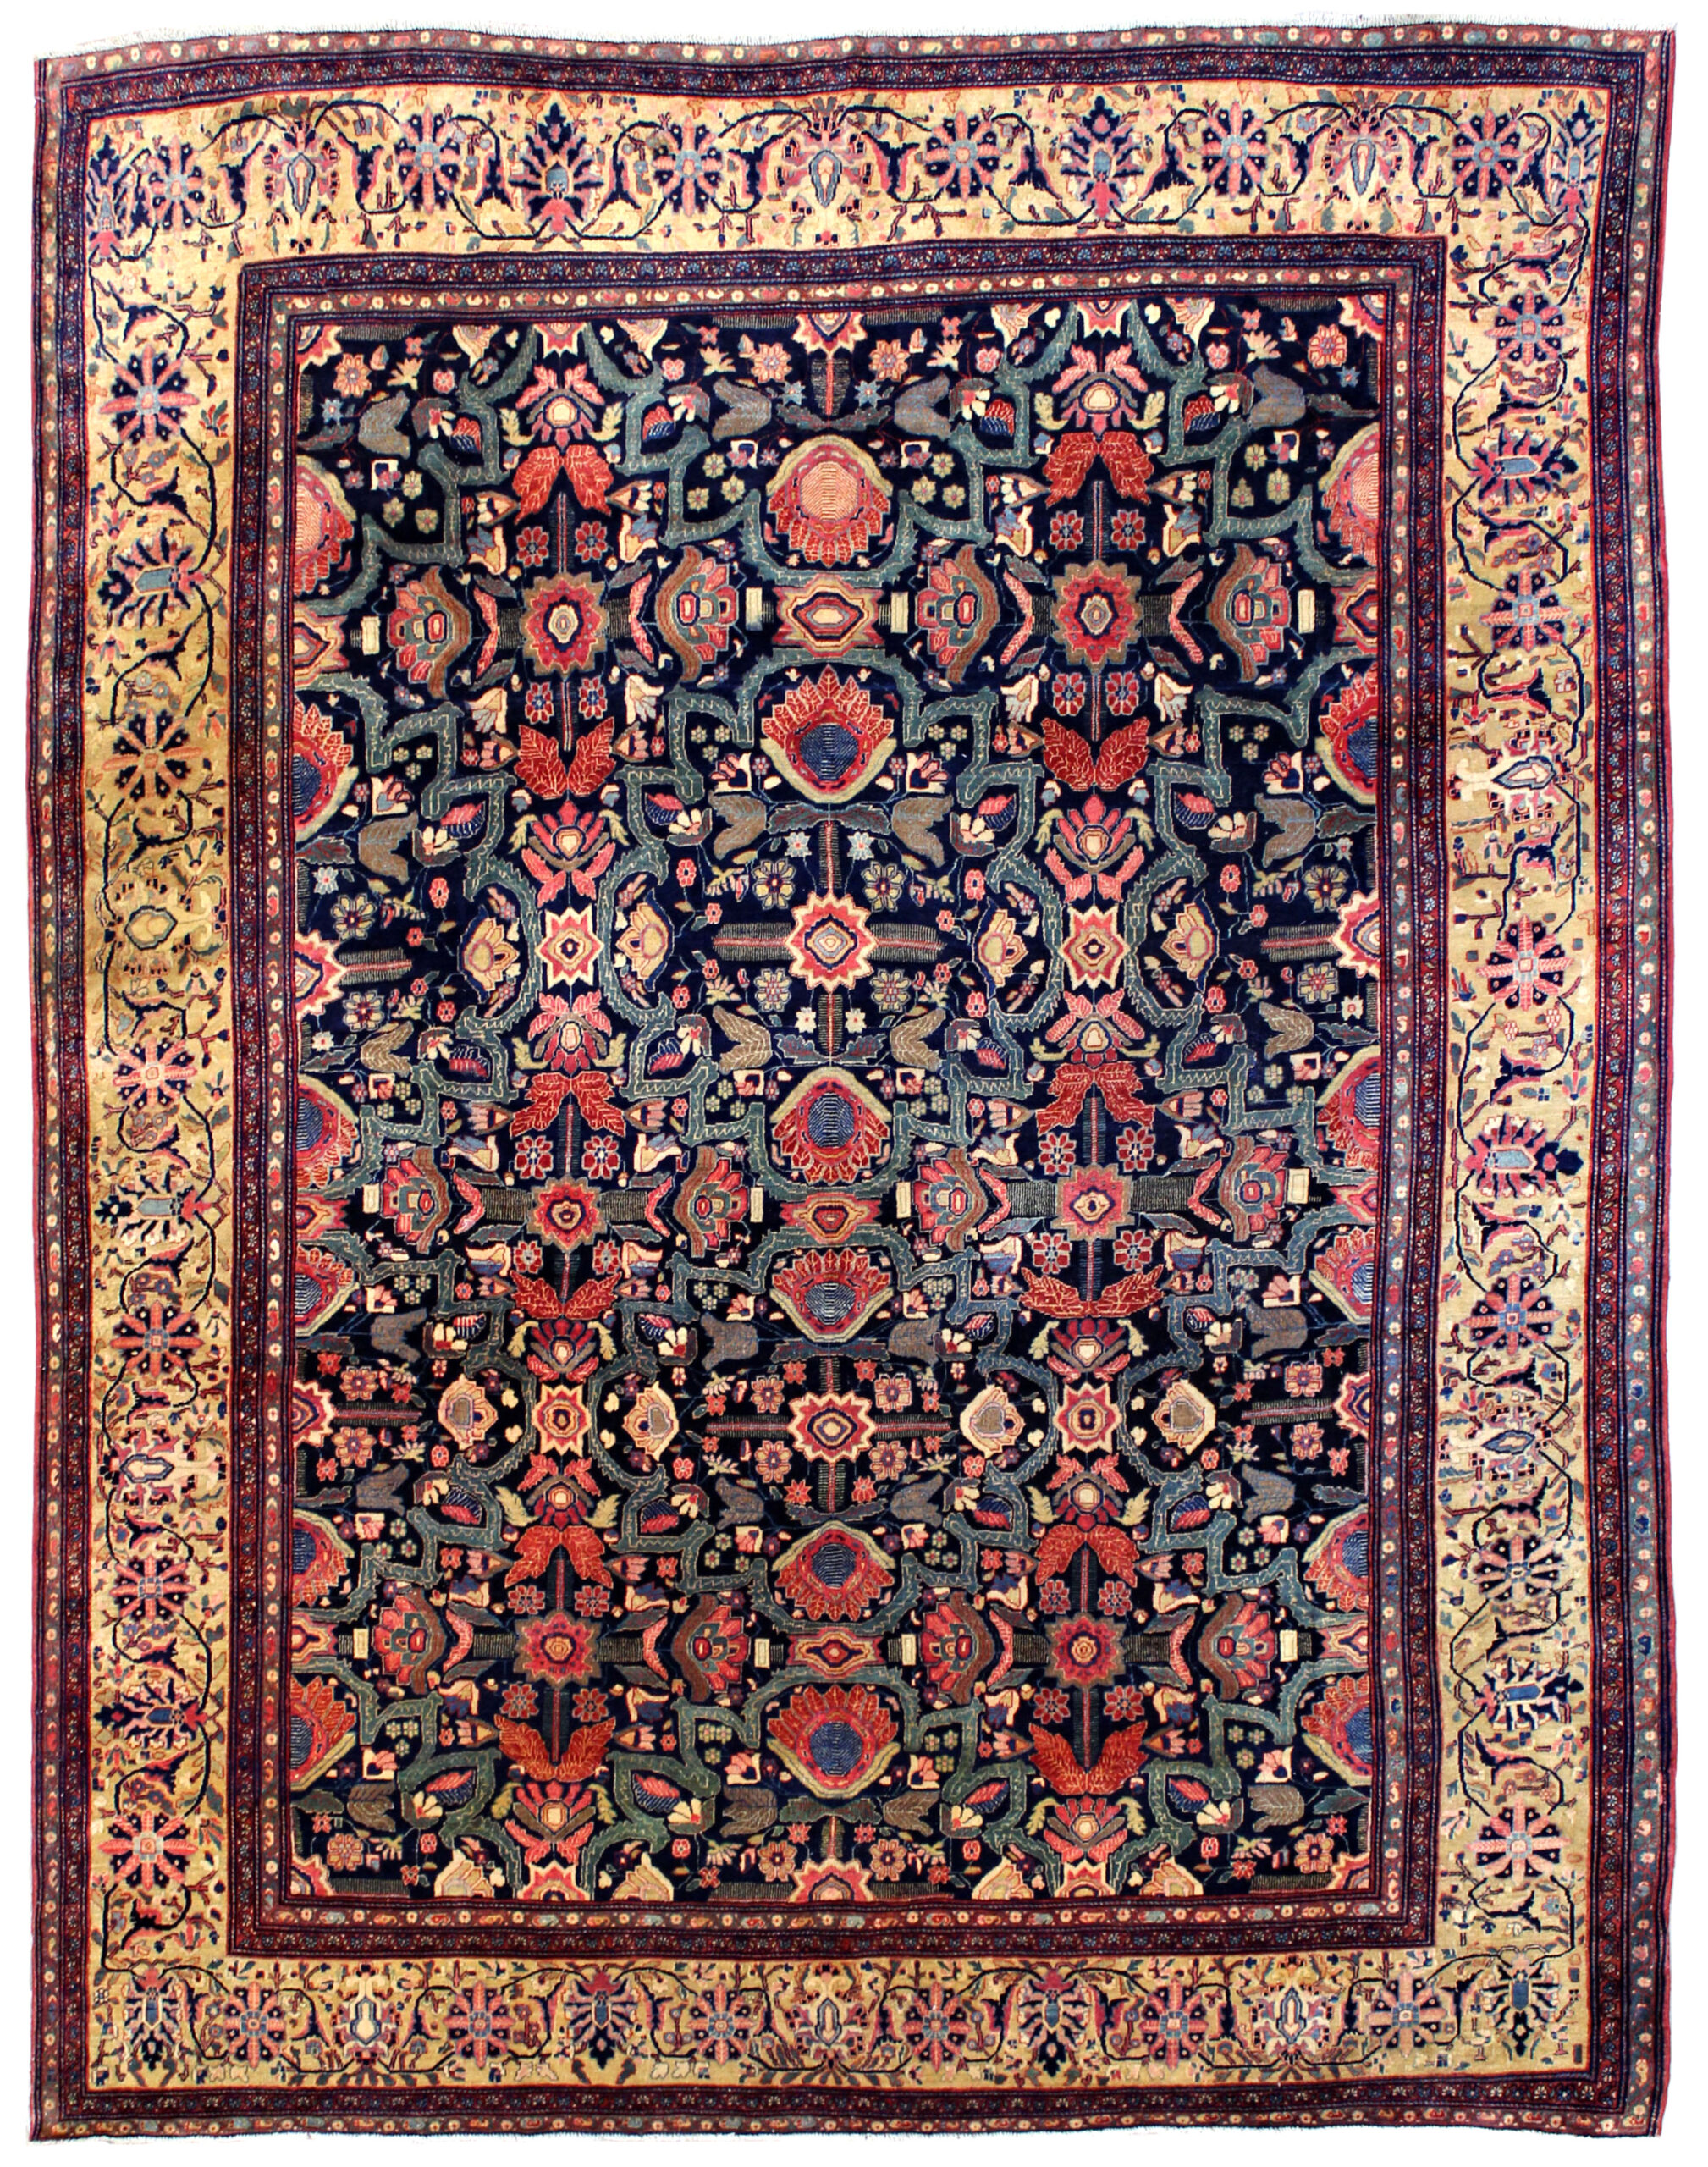 Room size antique Persian Fereghan Sarouk with a distinctive consisting of a navy field d decorated with flowers and strapwork and framed by a camel color border, circa 1900